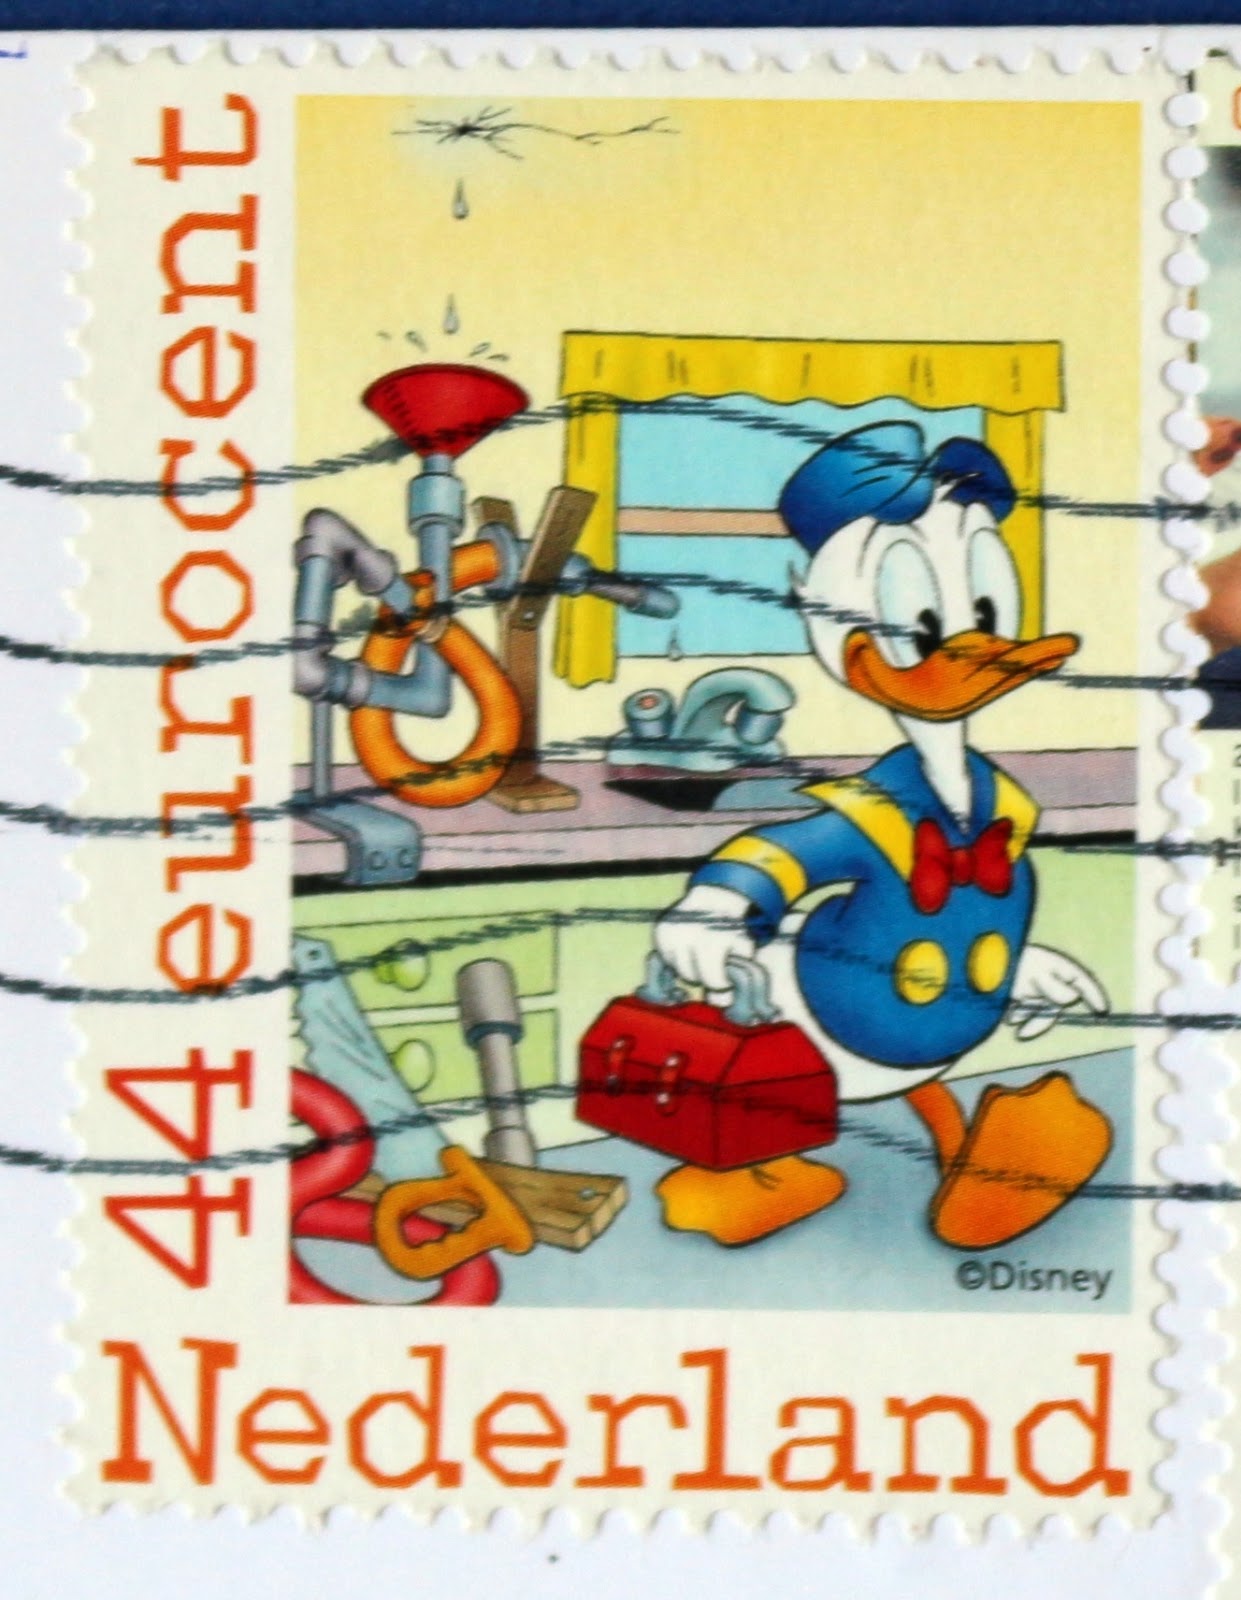 Mail Adventures: Some Cartoons on Stamps